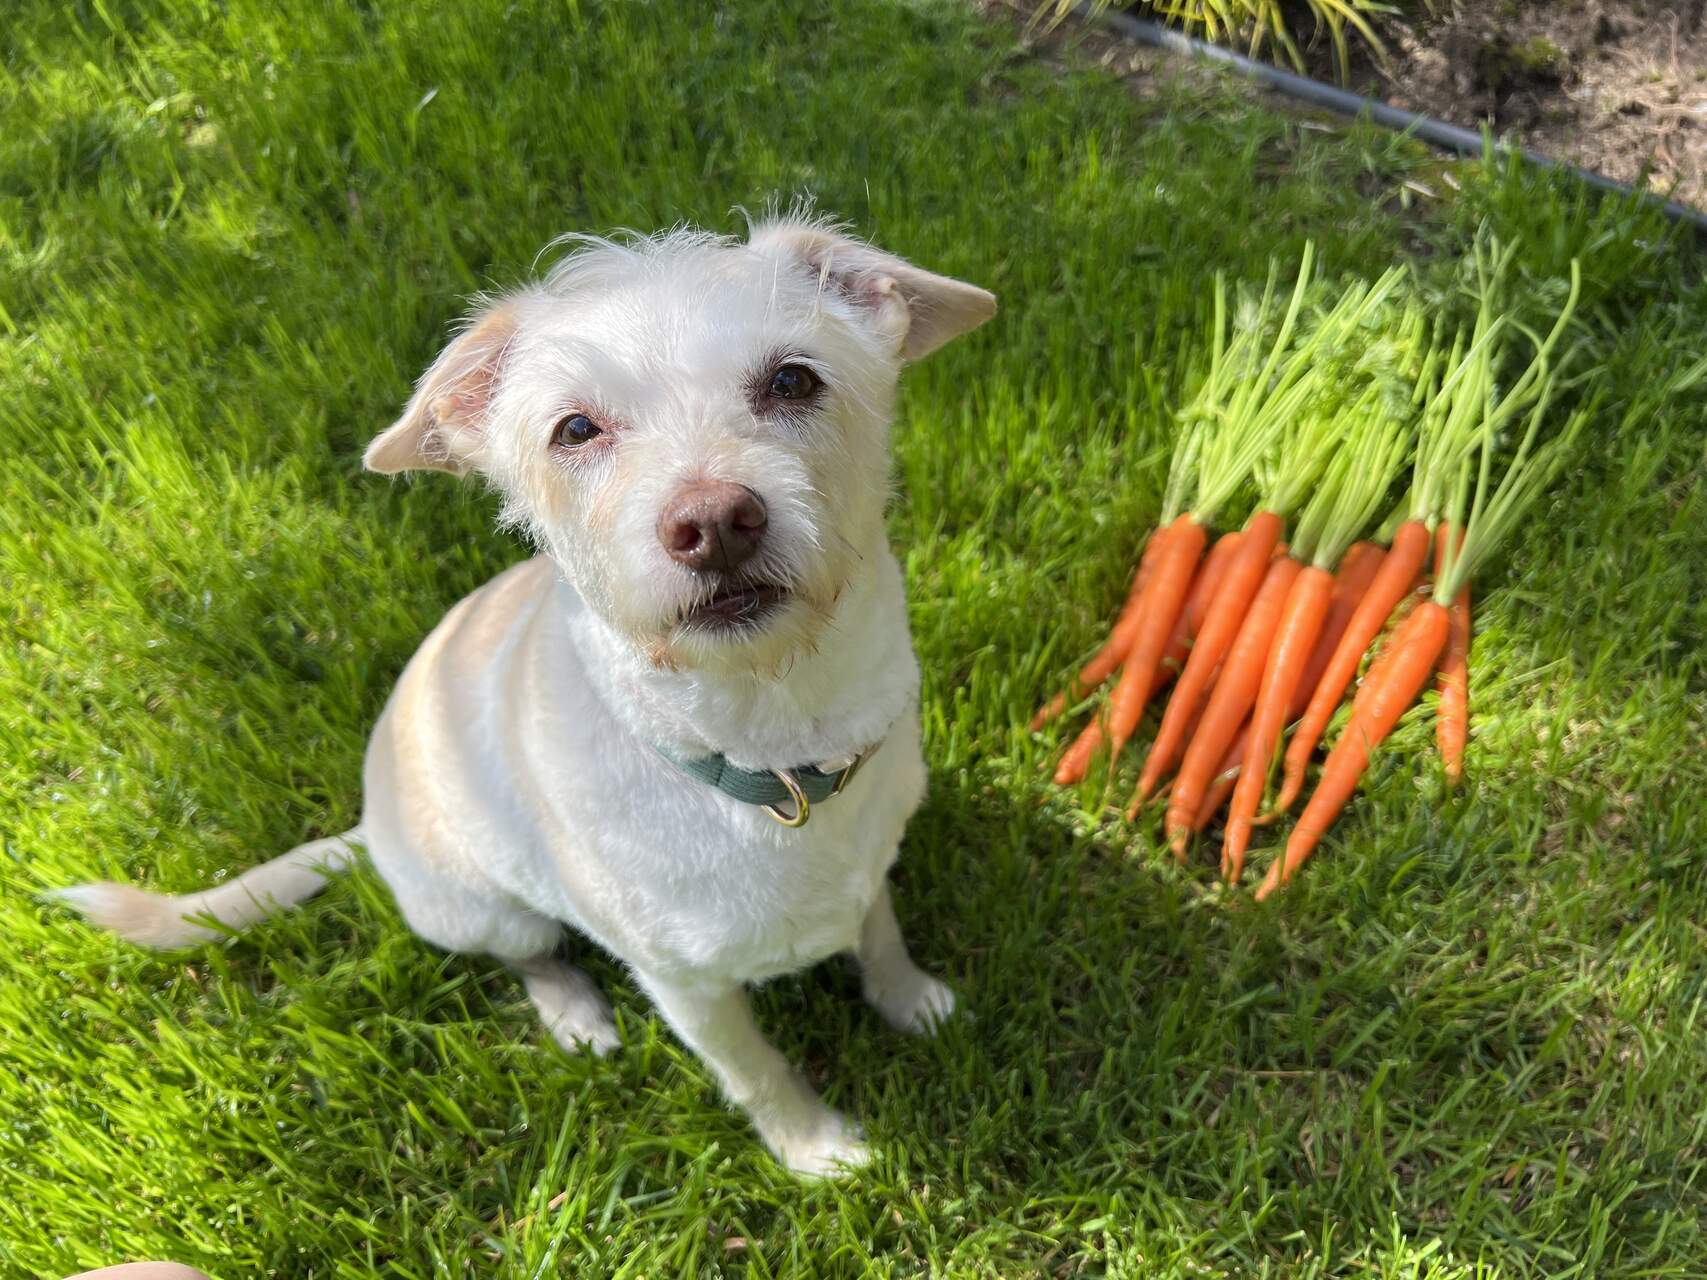 A dog sitting in a garden next to a pile of carrots